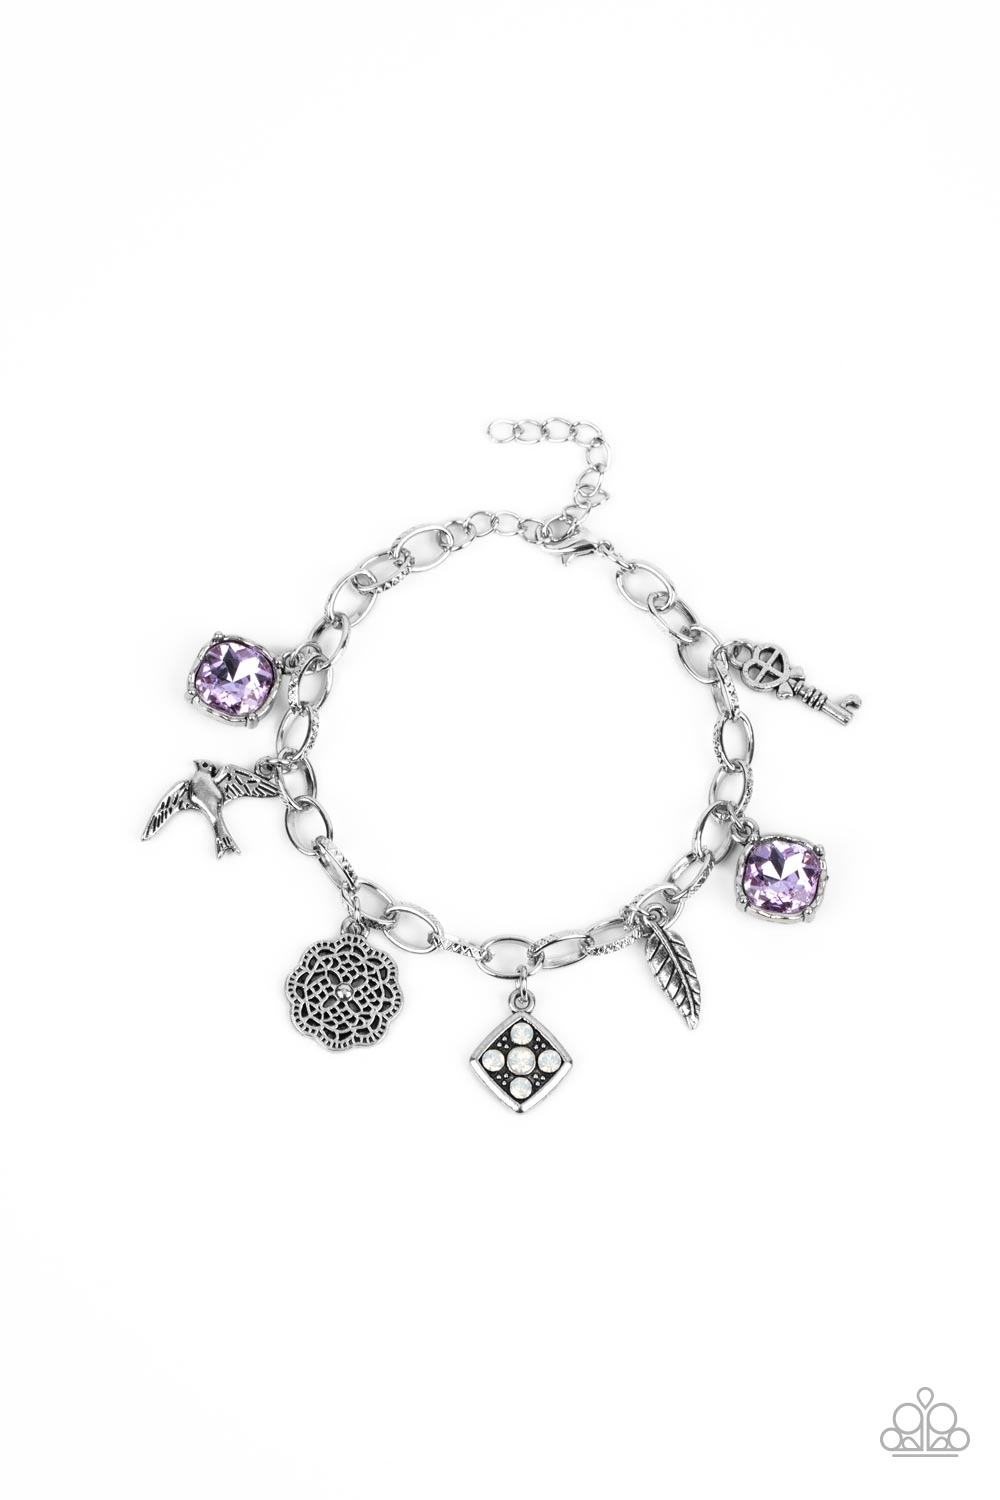 Fancifully Flighty Purple Charm Bracelet - Paparazzi Accessories  Sparkling purple gems, a floral medallion, a bird in flight, and a fluttering feather dangle from a delicate silver chain as they coalesce into a whimsical charm bracelet. Features an adjustable clasp closure.  All Paparazzi Accessories are lead free and nickel free!  Sold as one bracelet.